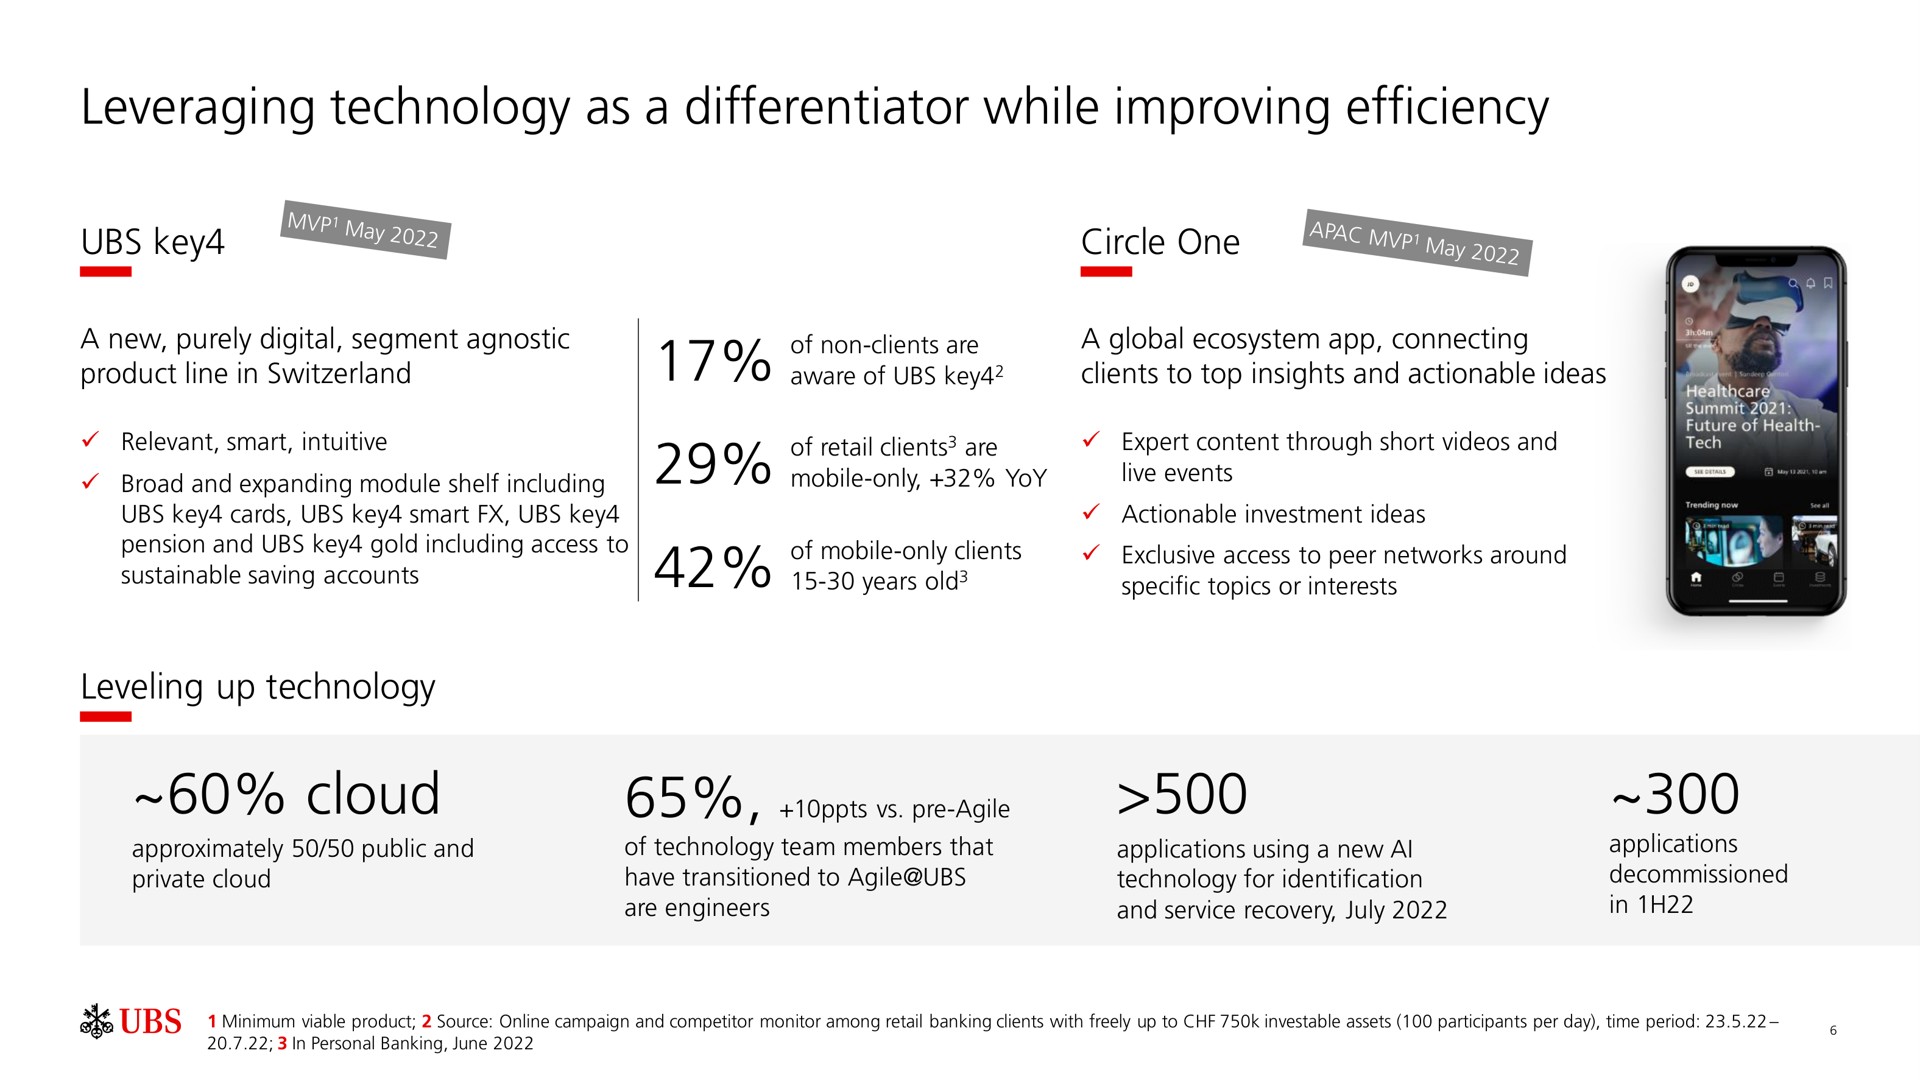 leveraging technology as a differentiator while improving efficiency cloud key cay circle one | UBS